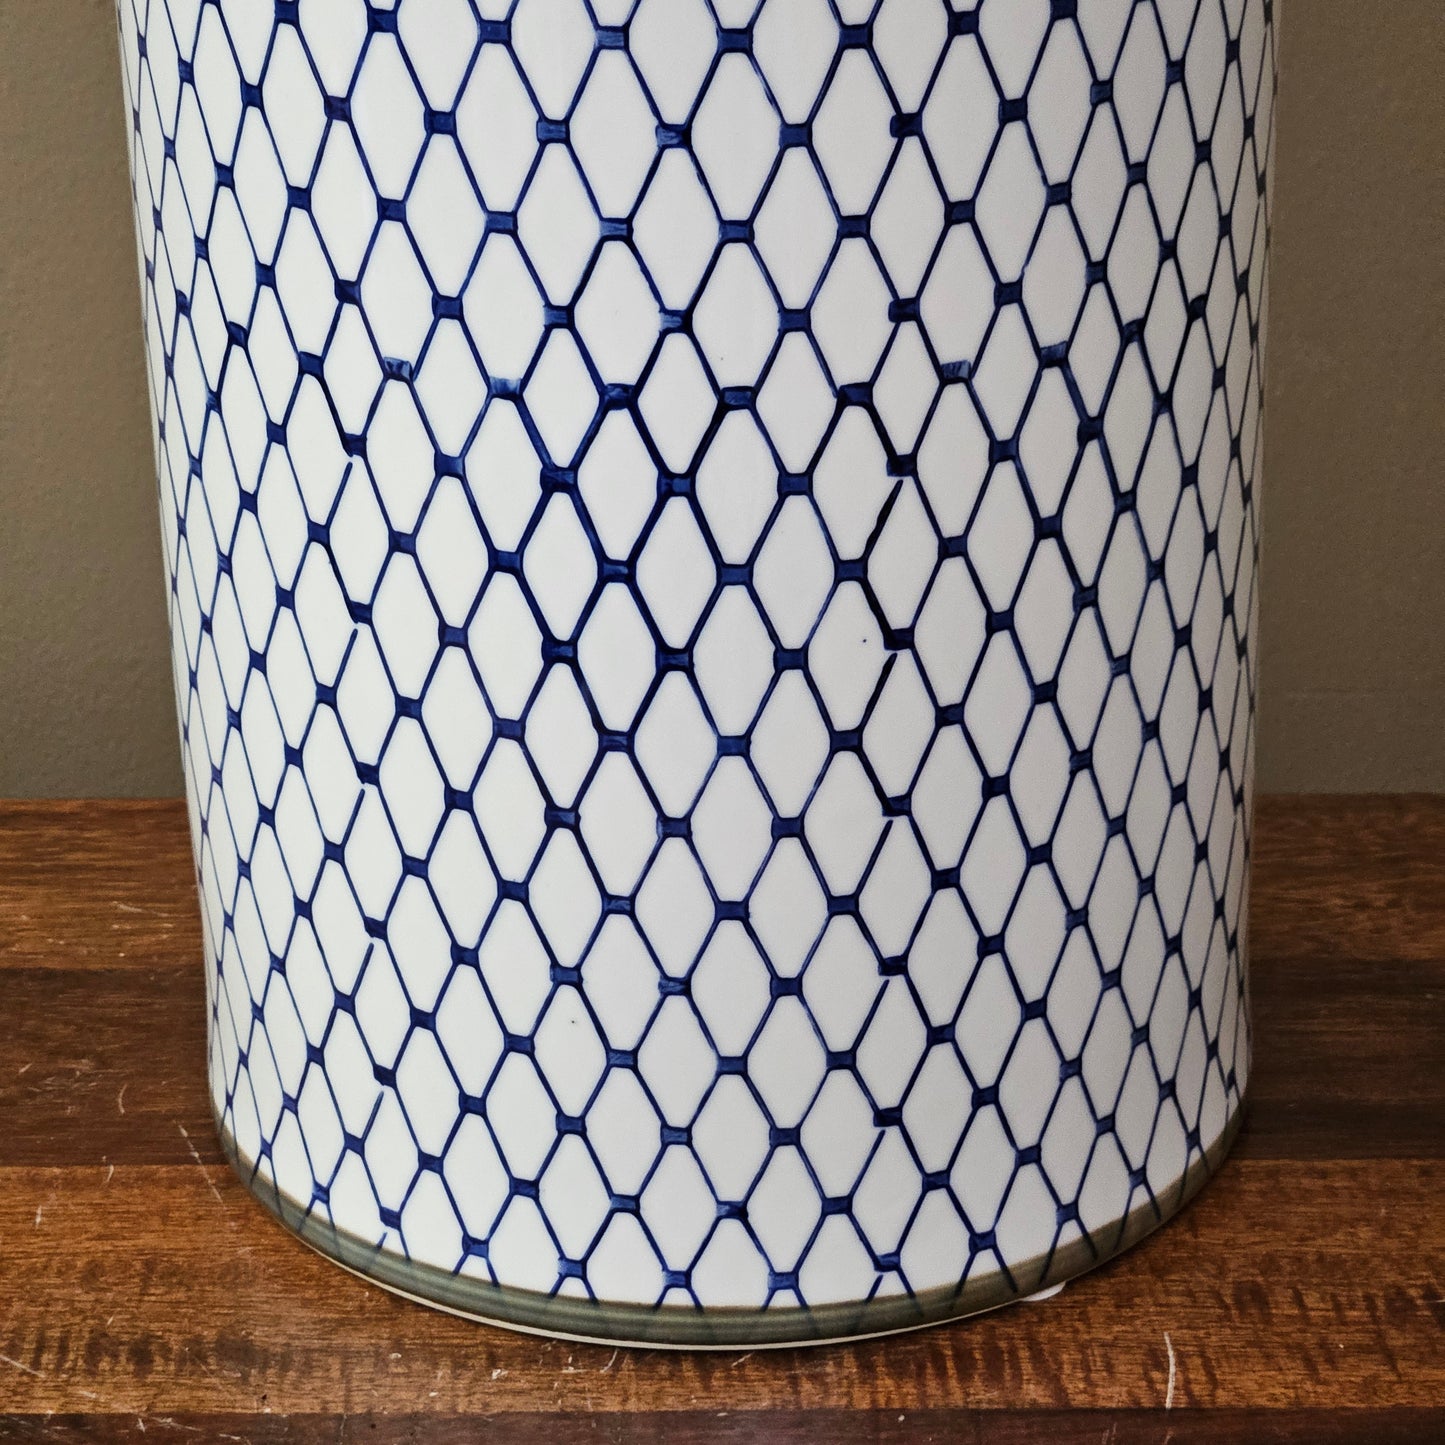 16" Blue & White Porcelain Canister Jar with Netted Design & Lid ~ 4 Available